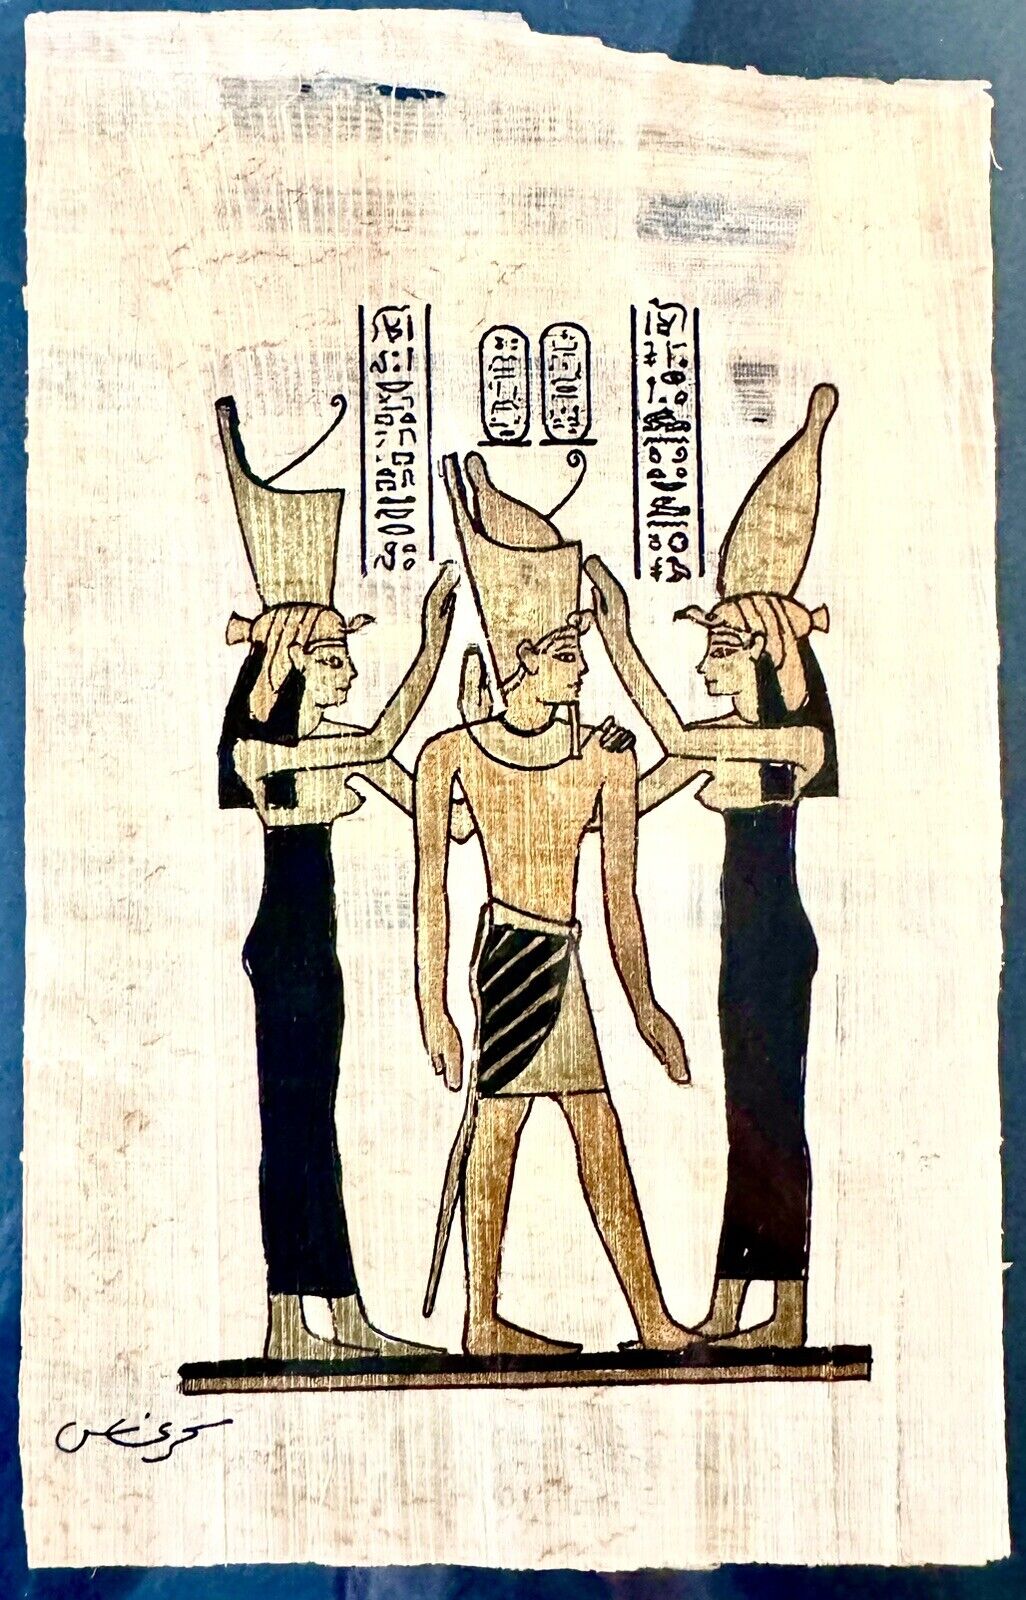 Genuine Egyptian Papyrus Painting Of God Horus Being Attended By Two Slave Girls